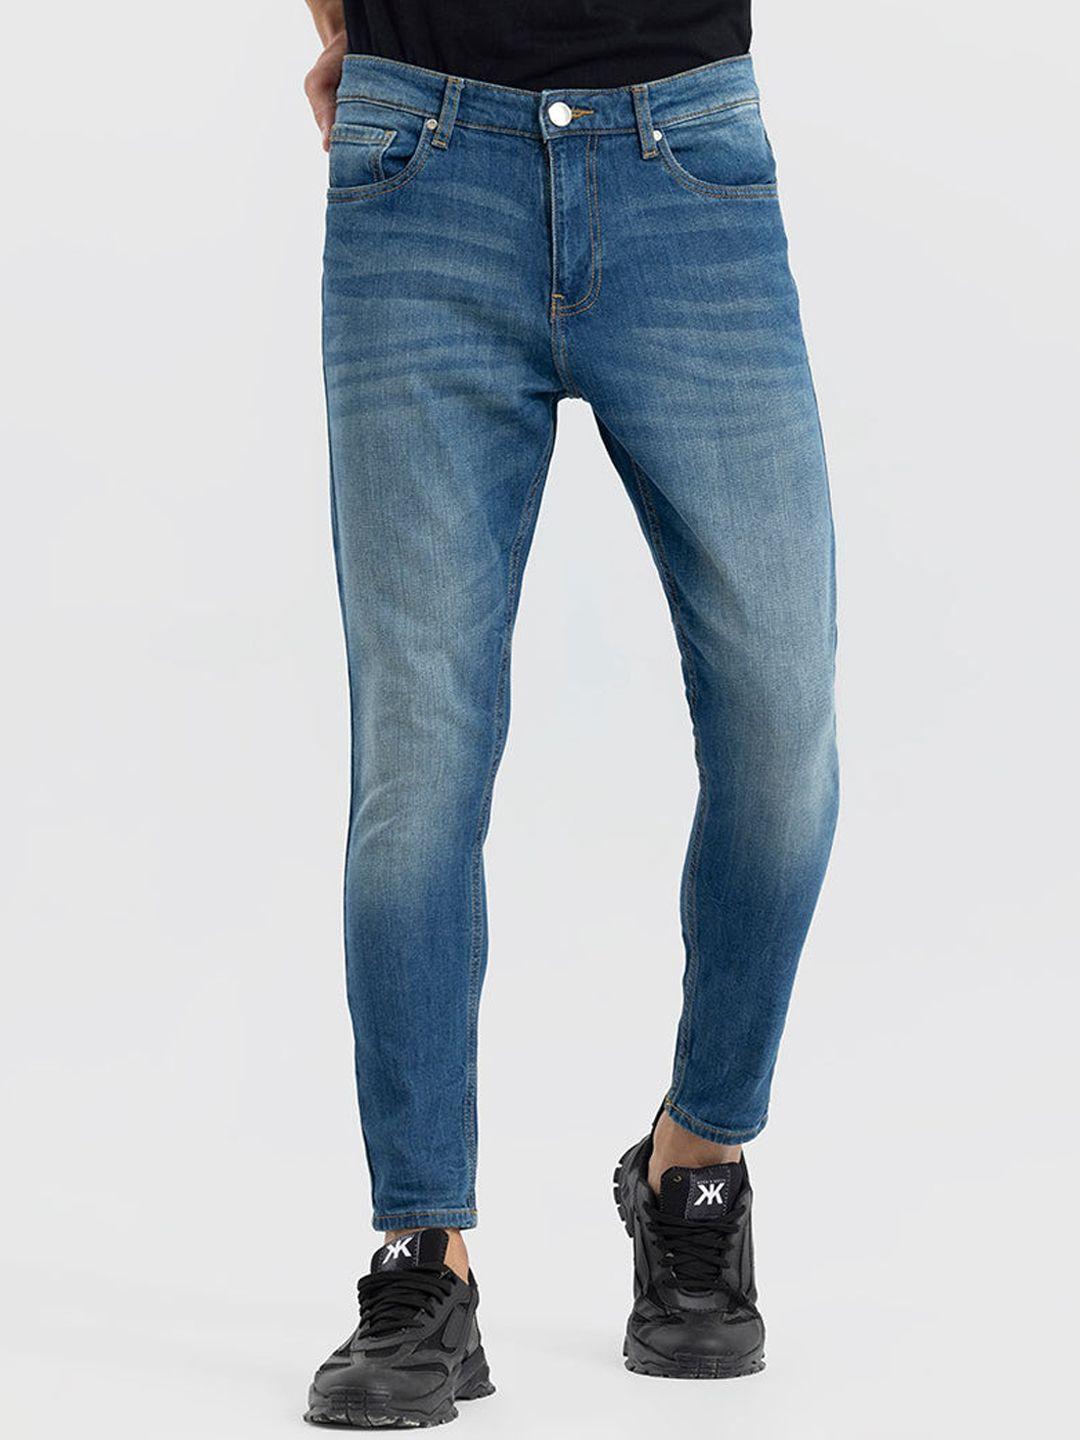 snitch-men-classic-skinny-fit-light-fade-stretchable-jeans